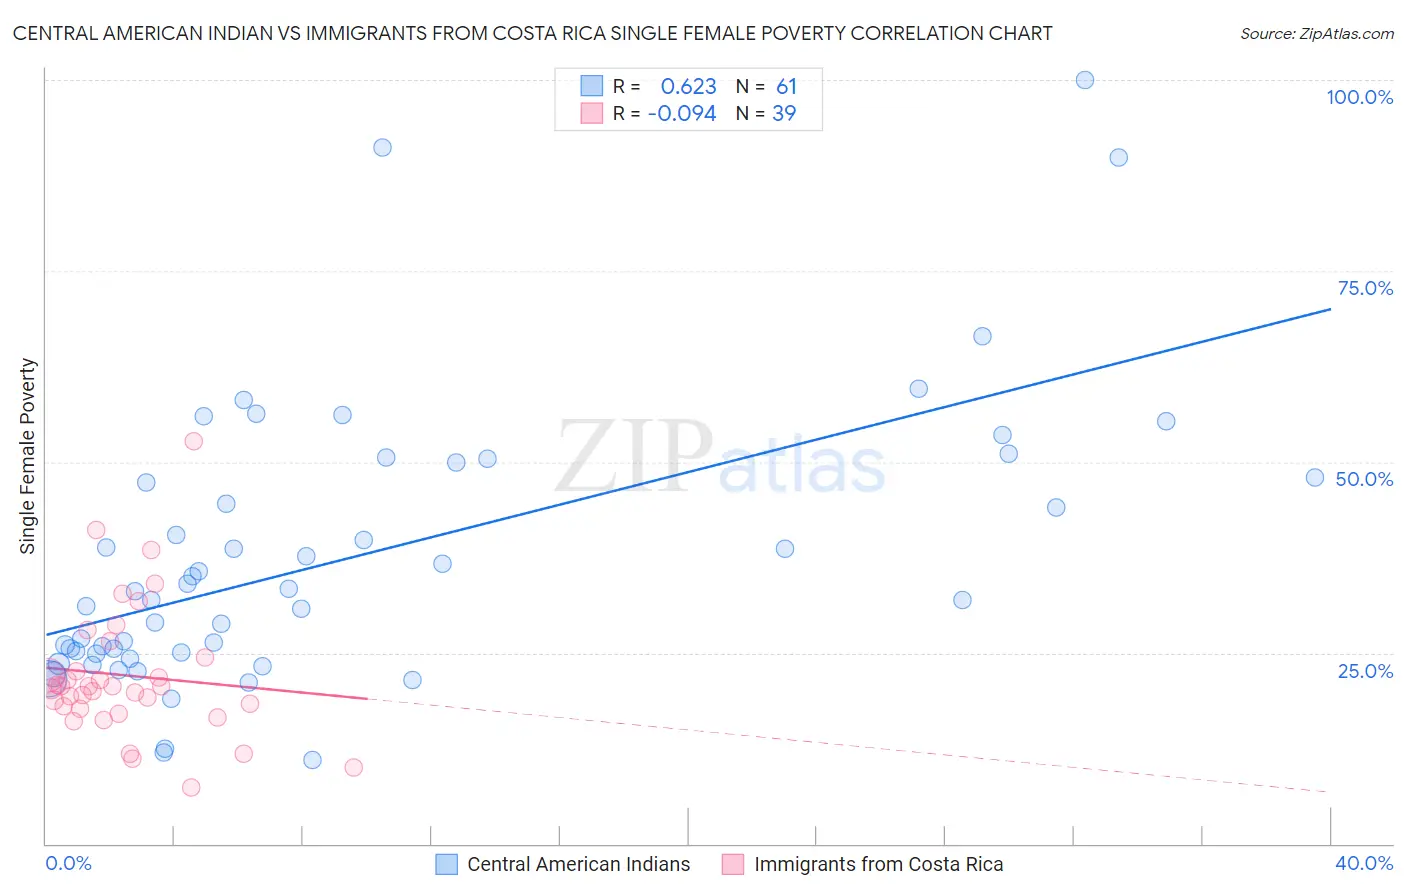 Central American Indian vs Immigrants from Costa Rica Single Female Poverty